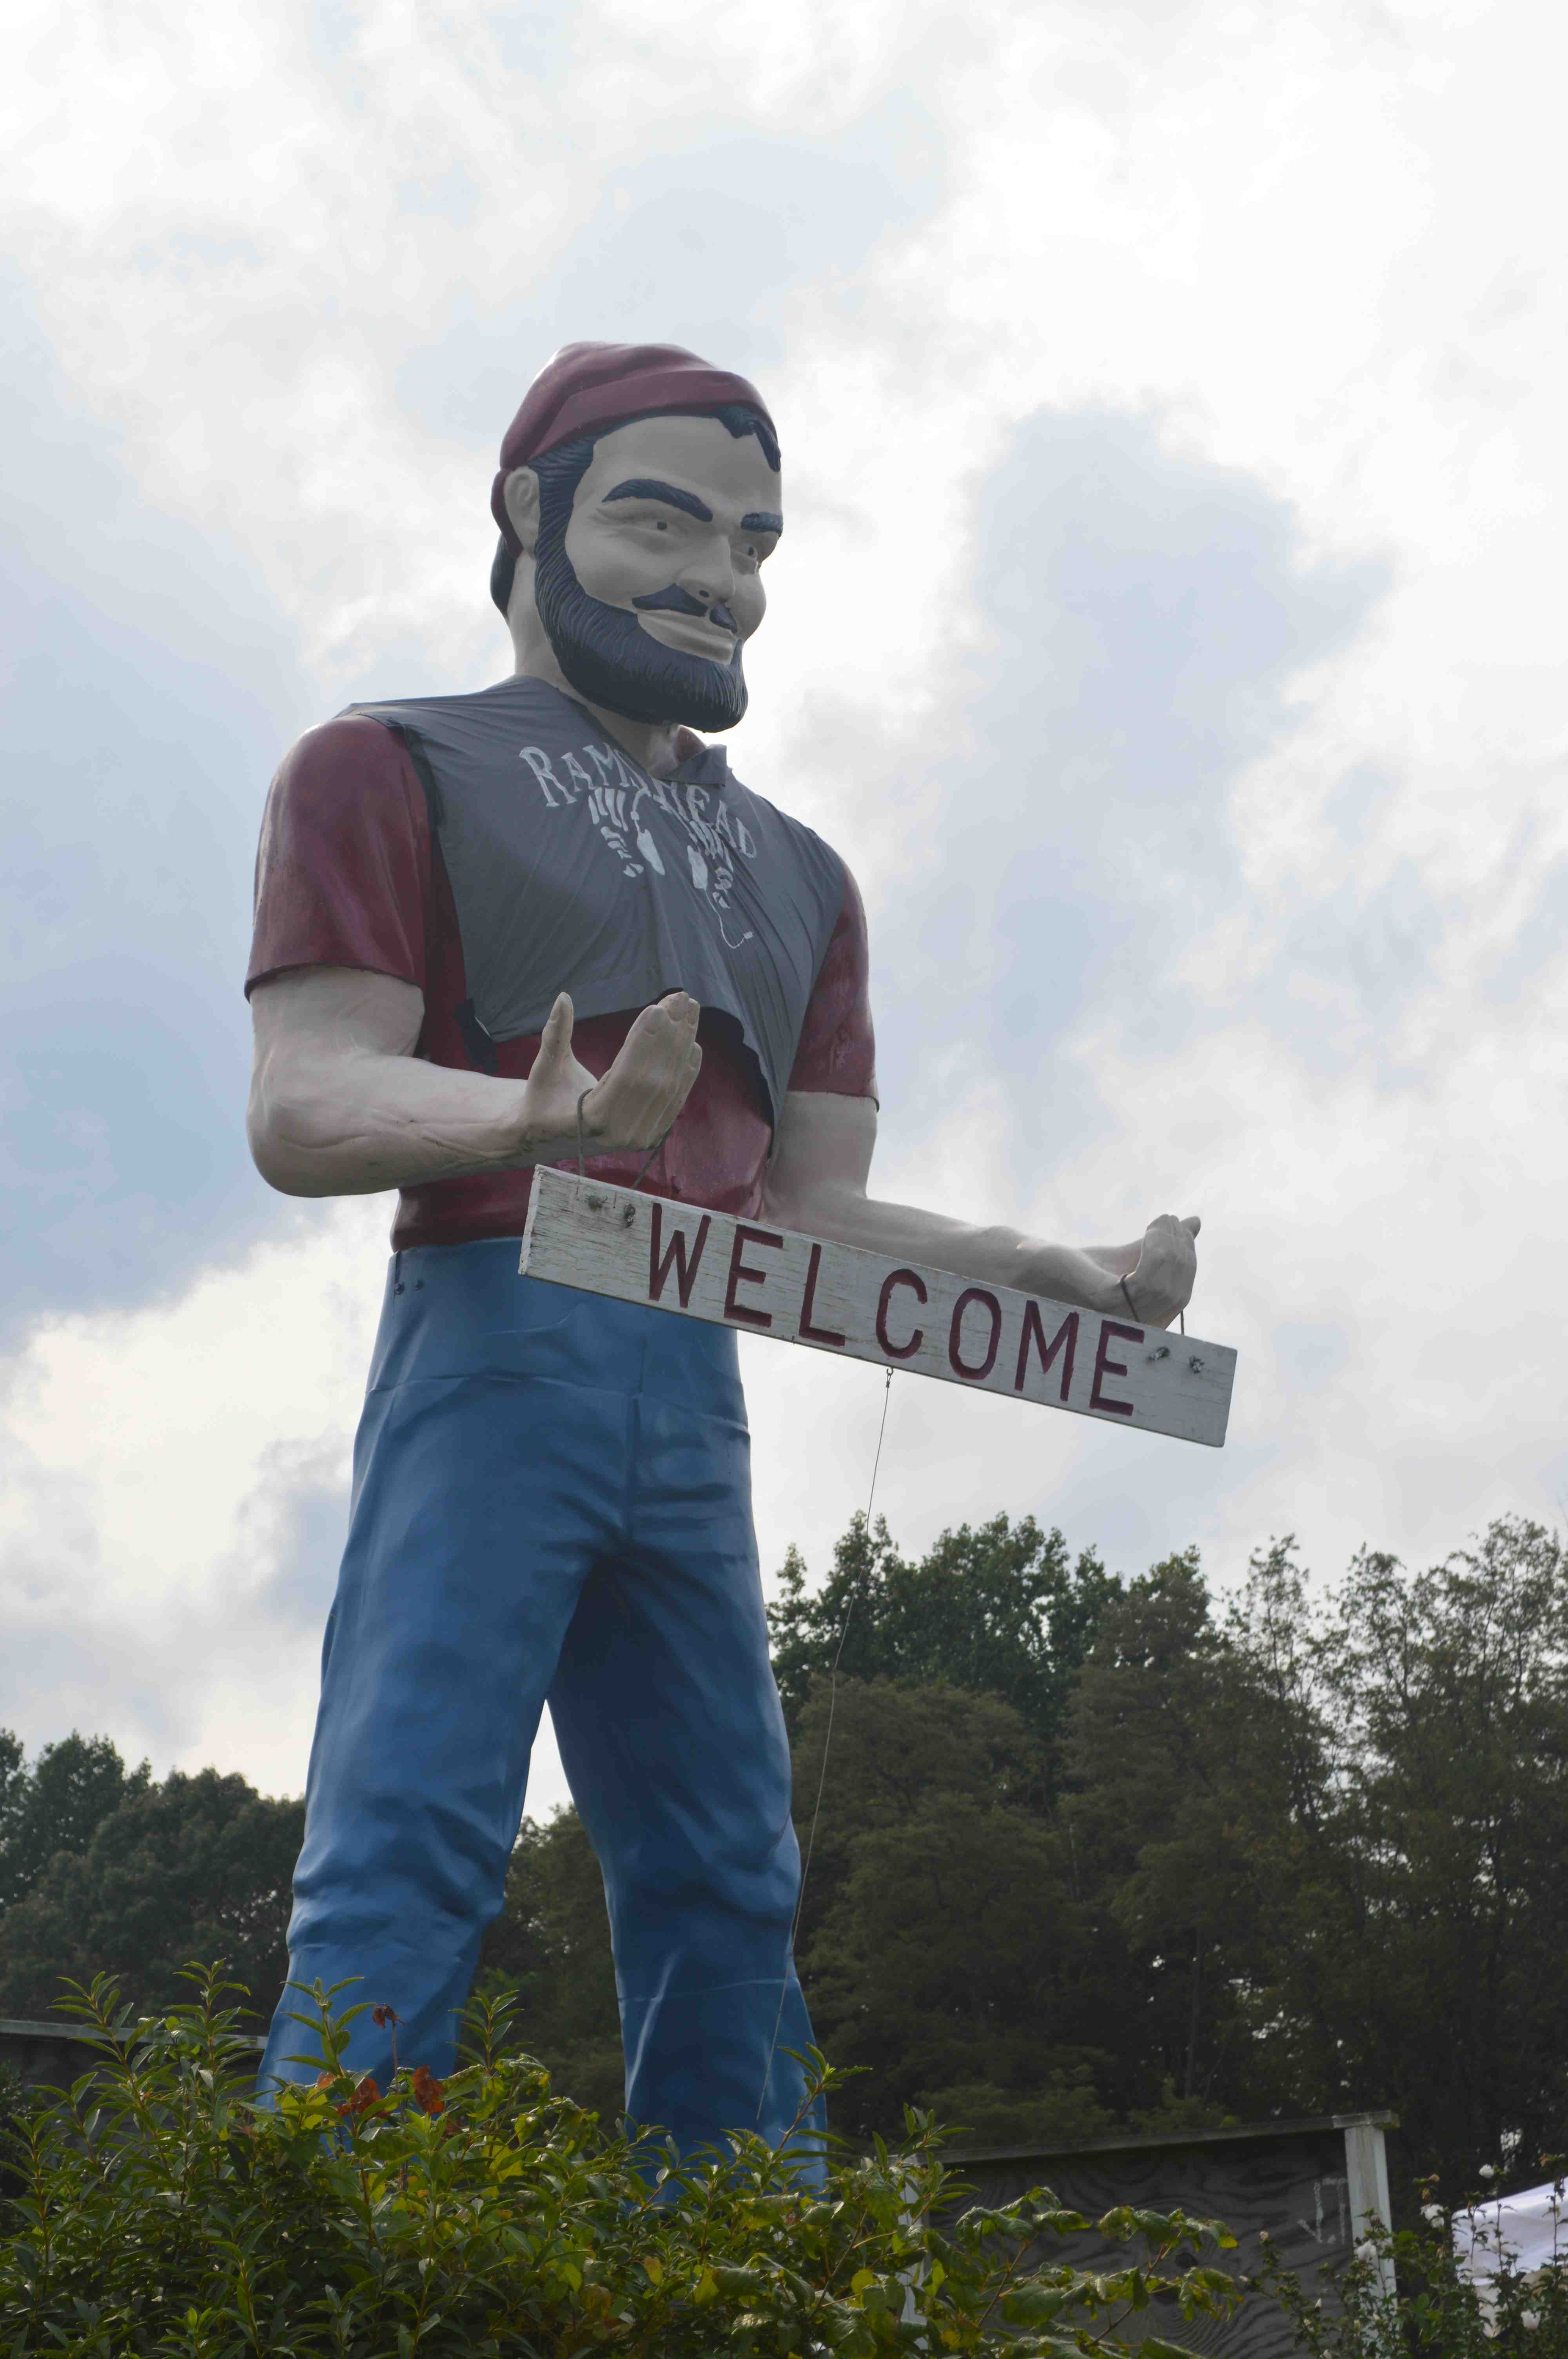 The giant lumberjack that welcomes (or scares away) festival goers